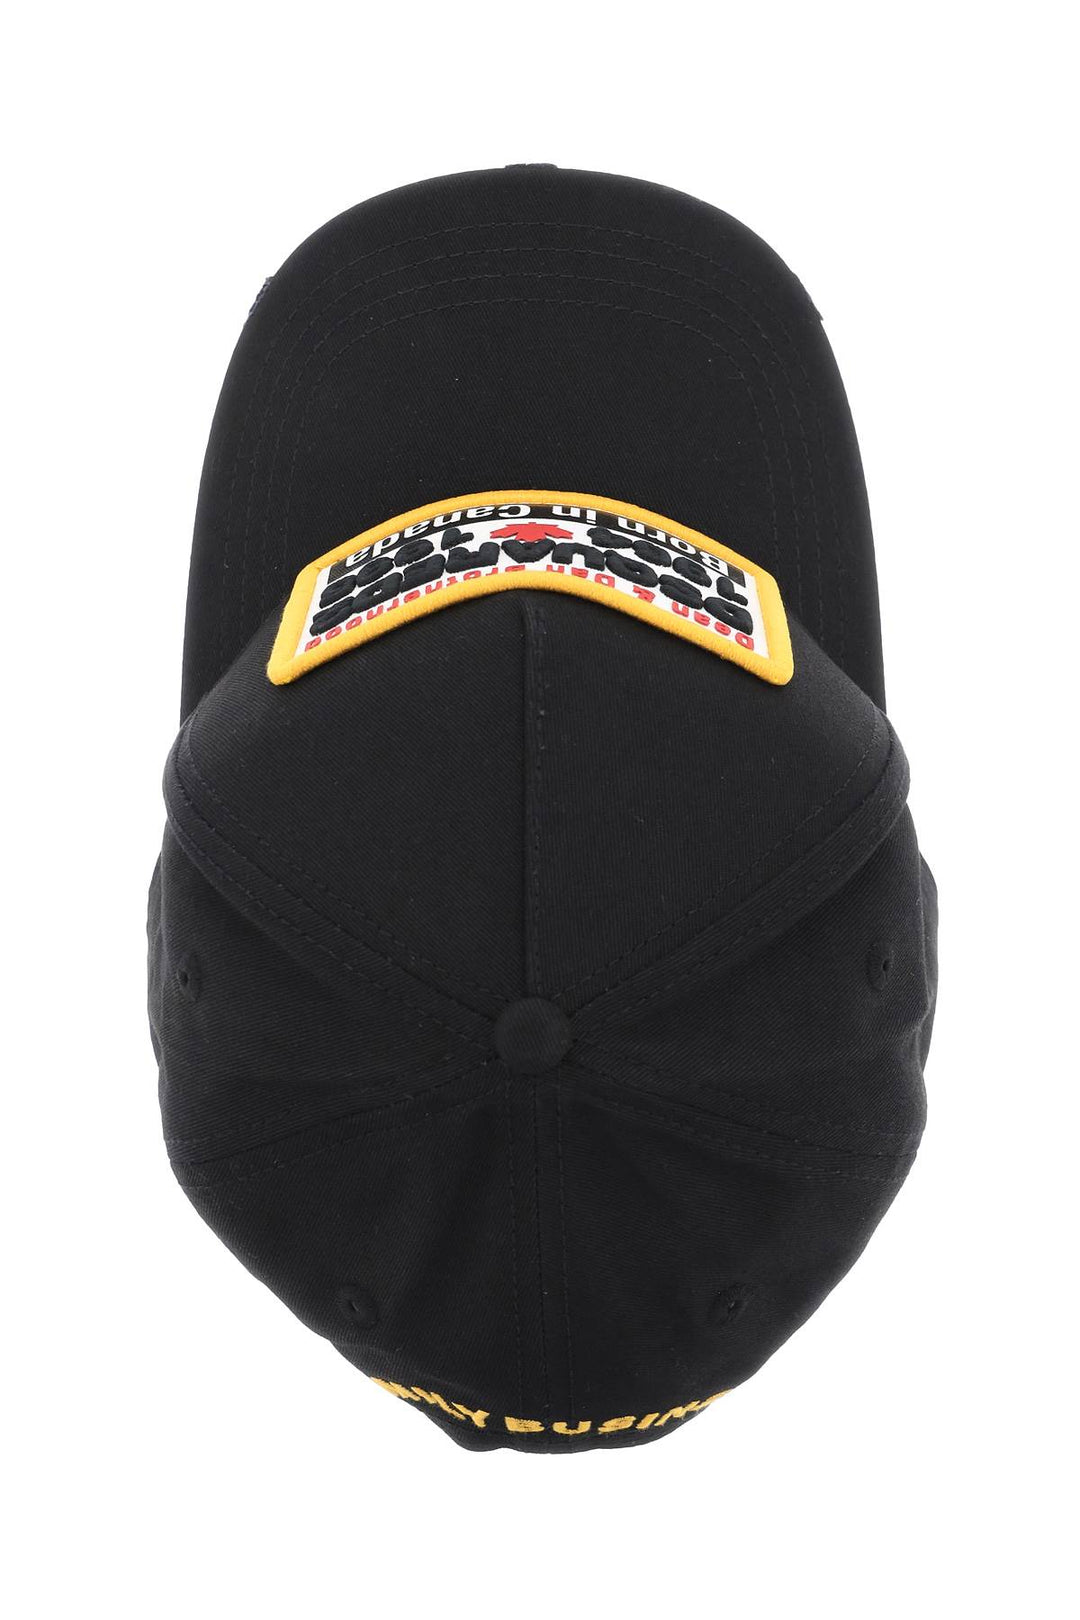 Dsquared2 Baseball Cap With Logoed Patch   Black